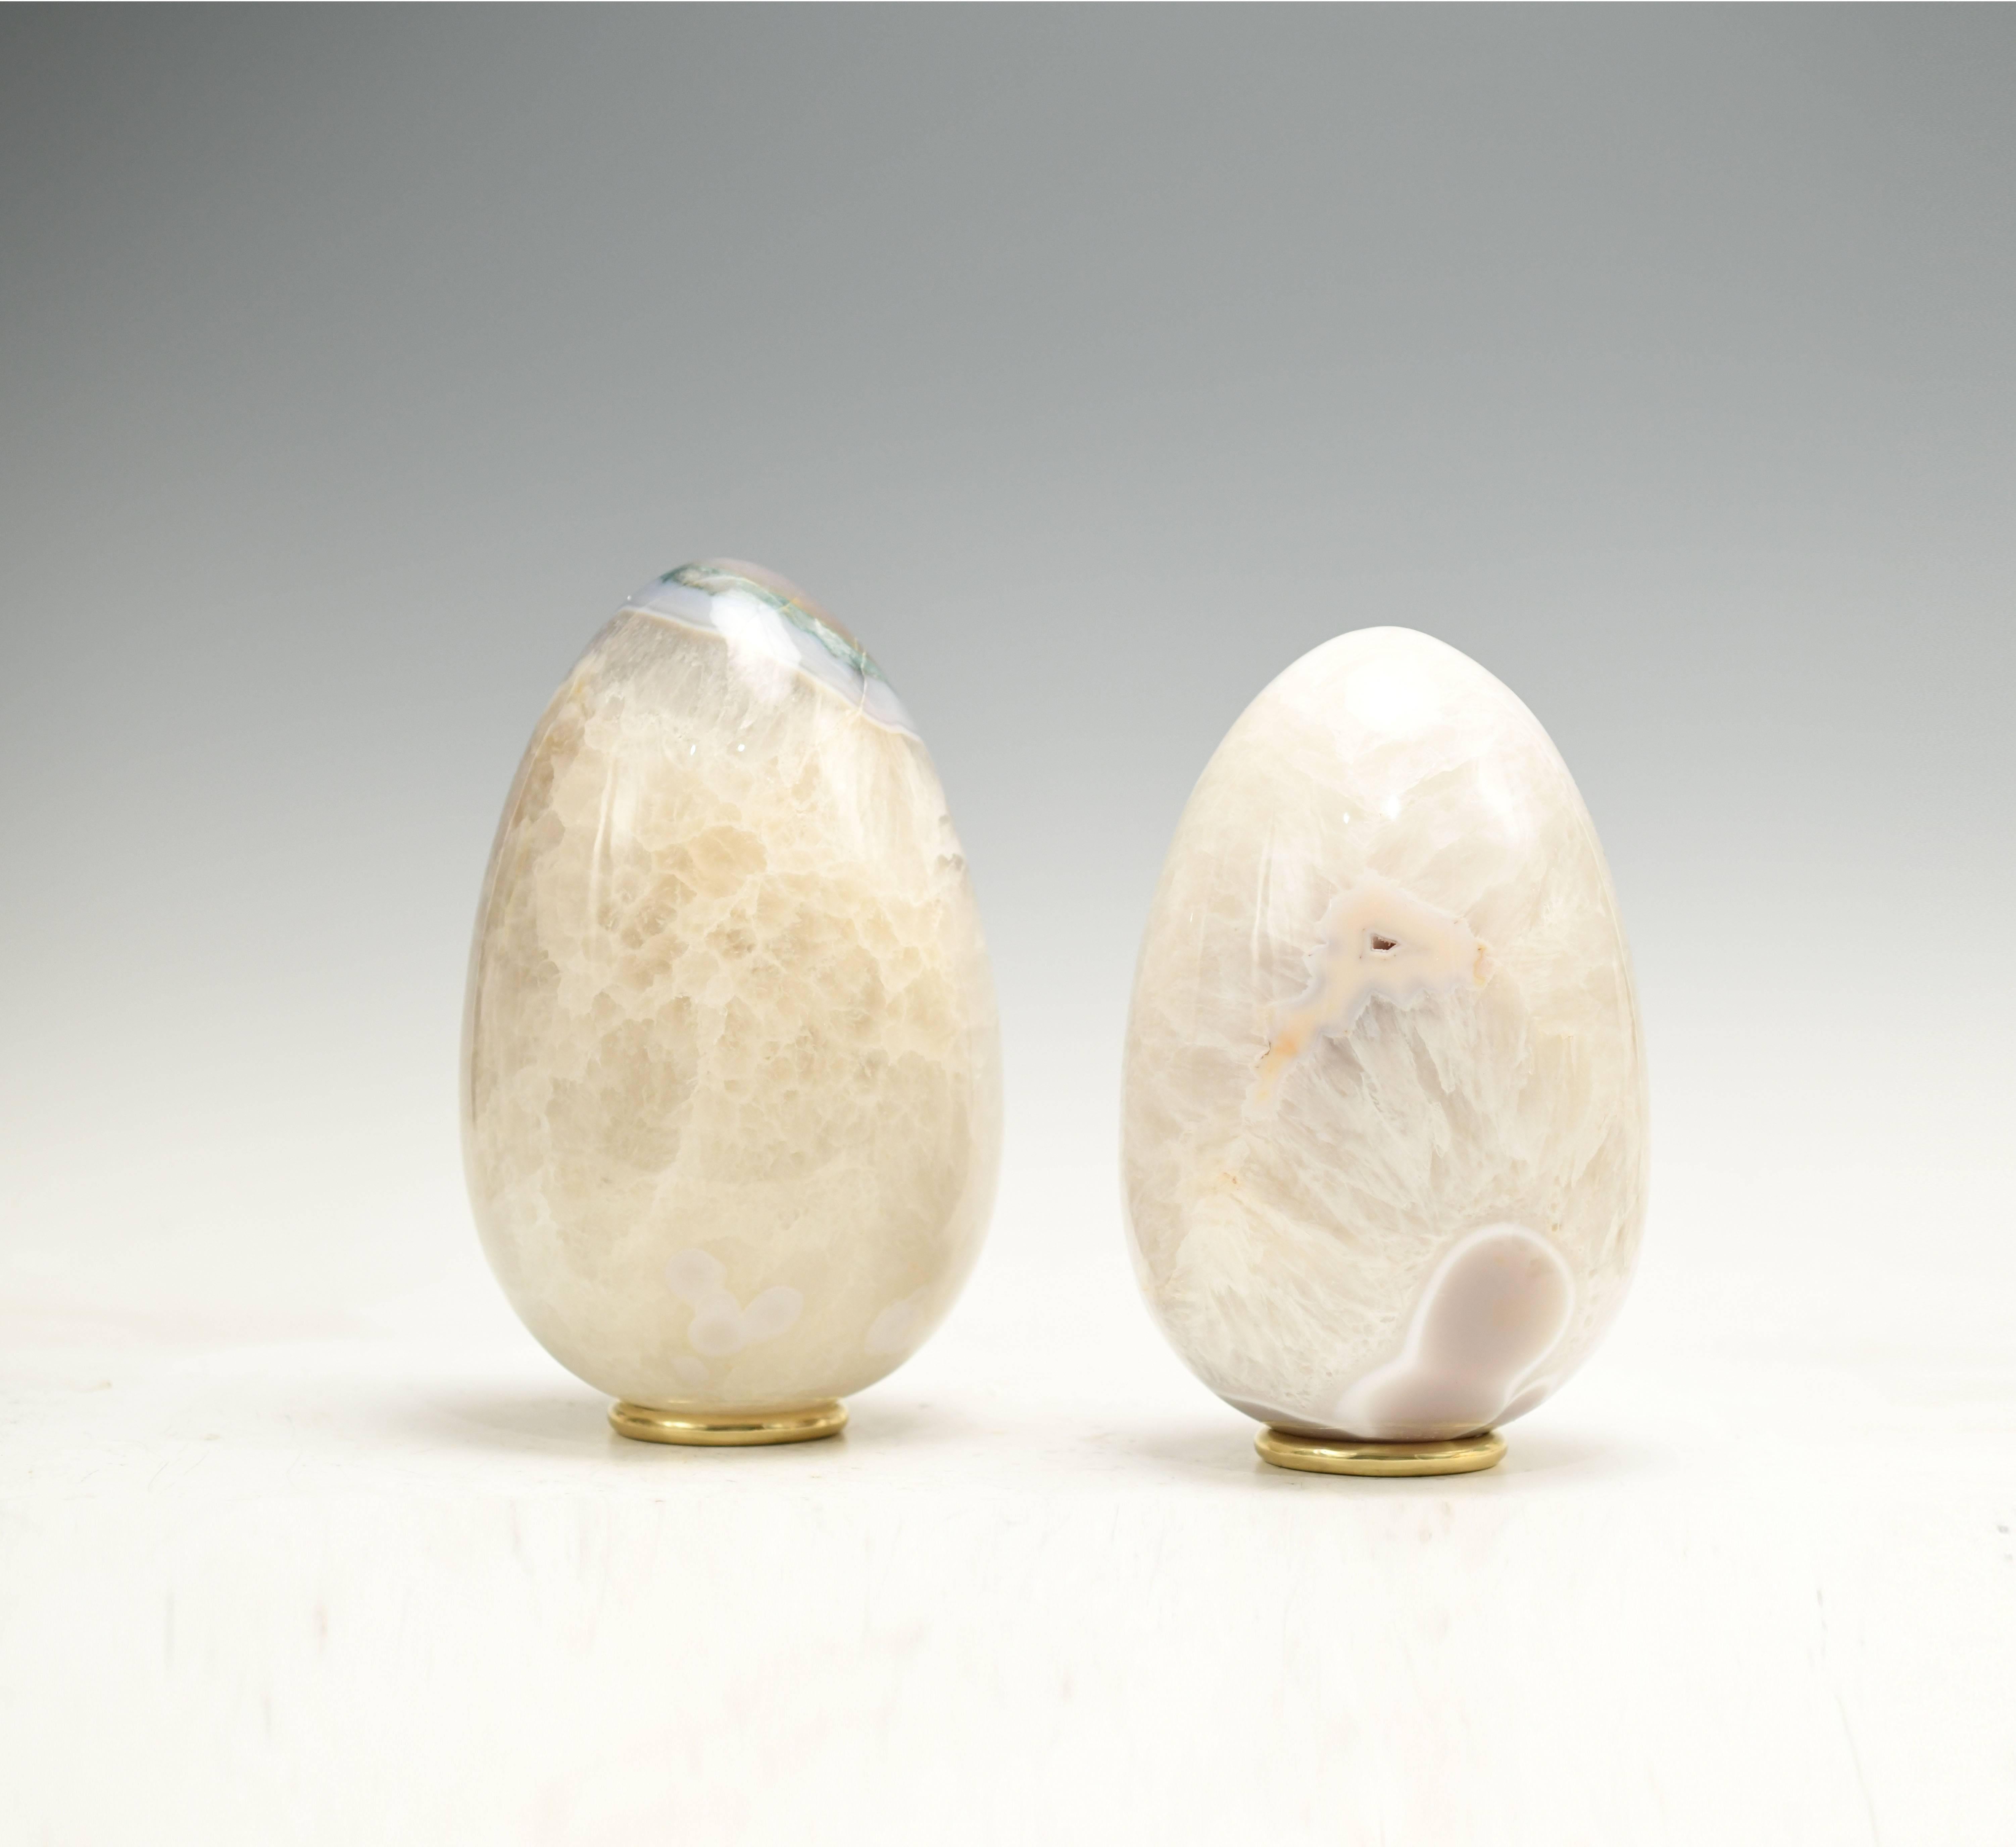 A group of two carved egg form agate sculptures with polish brass bases. 
The specimen was carved from larger natural agate into an egg form. Created by Phoenix Gallery.

Measures: The left one sculpture size is 6.25